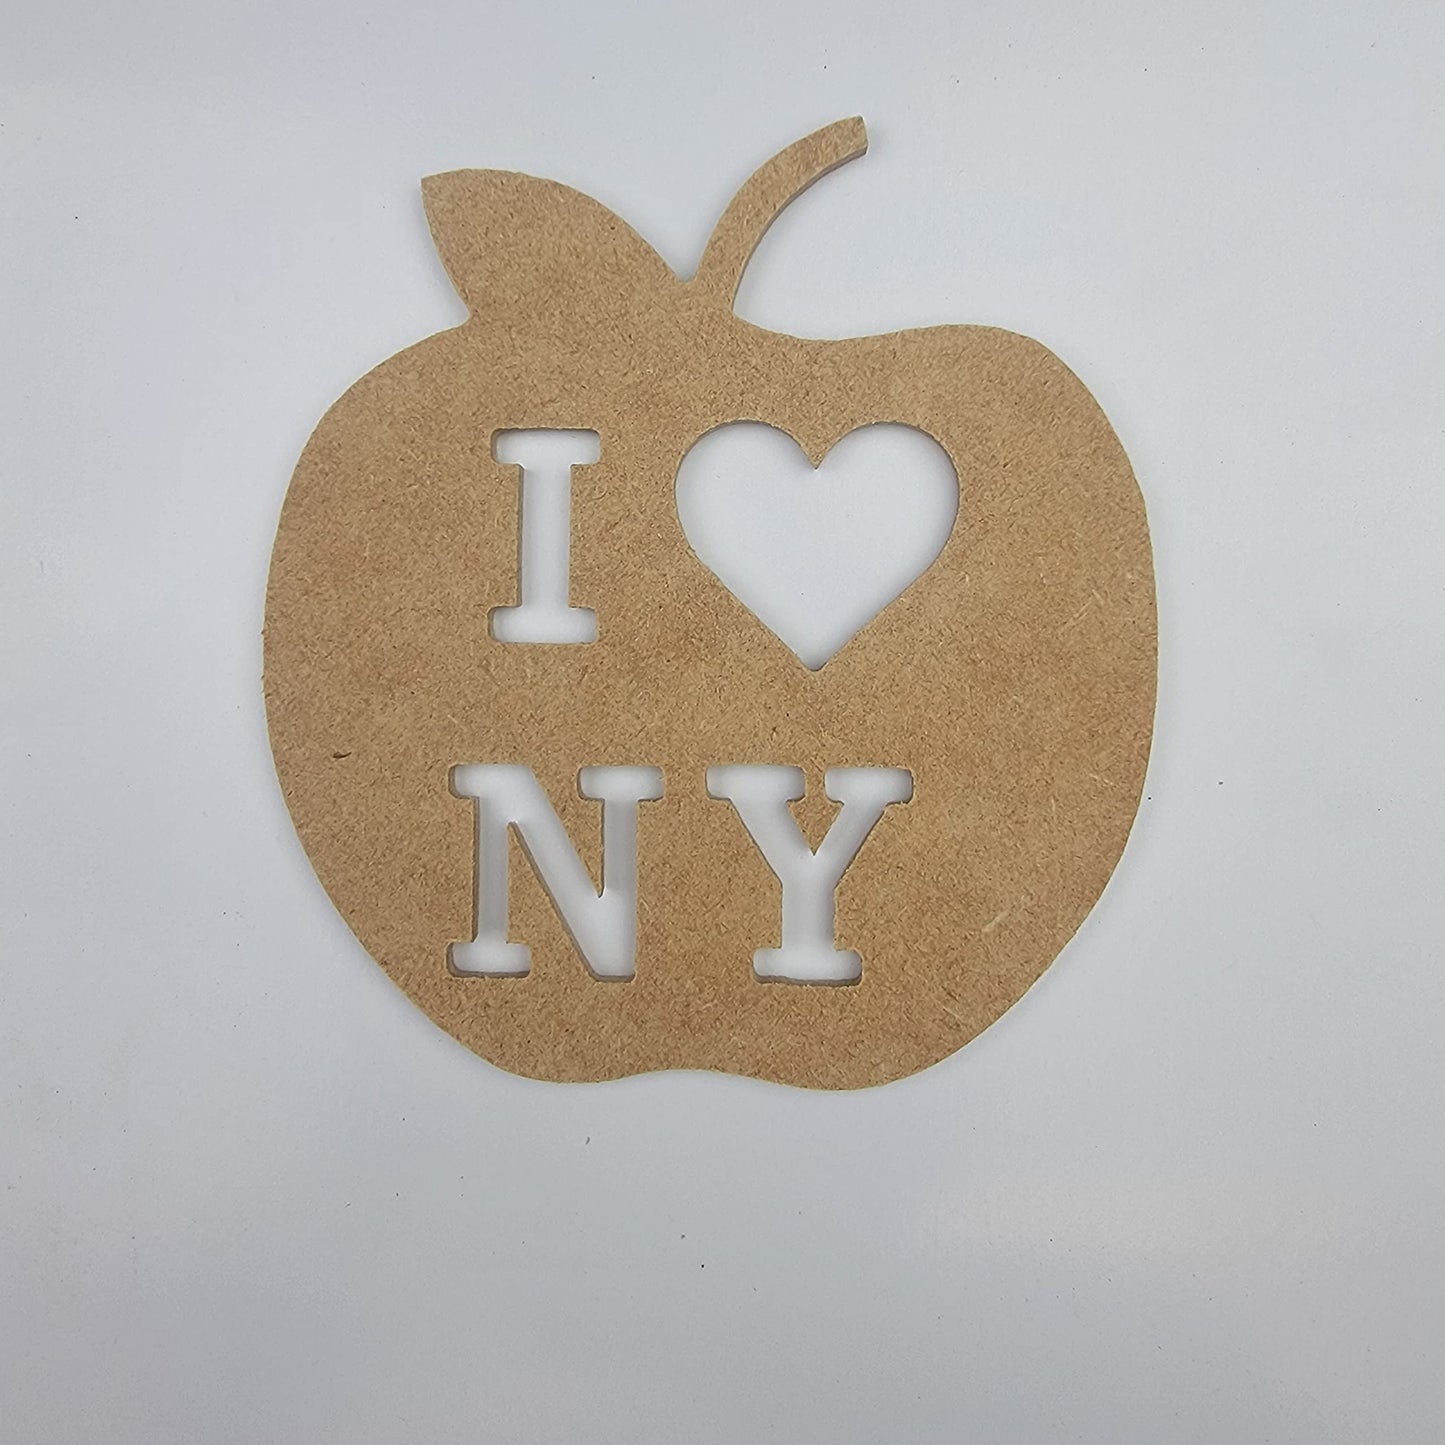 3" Love New York Apple, Unfinished MDF Art Shape by Wooden Craft Cutouts